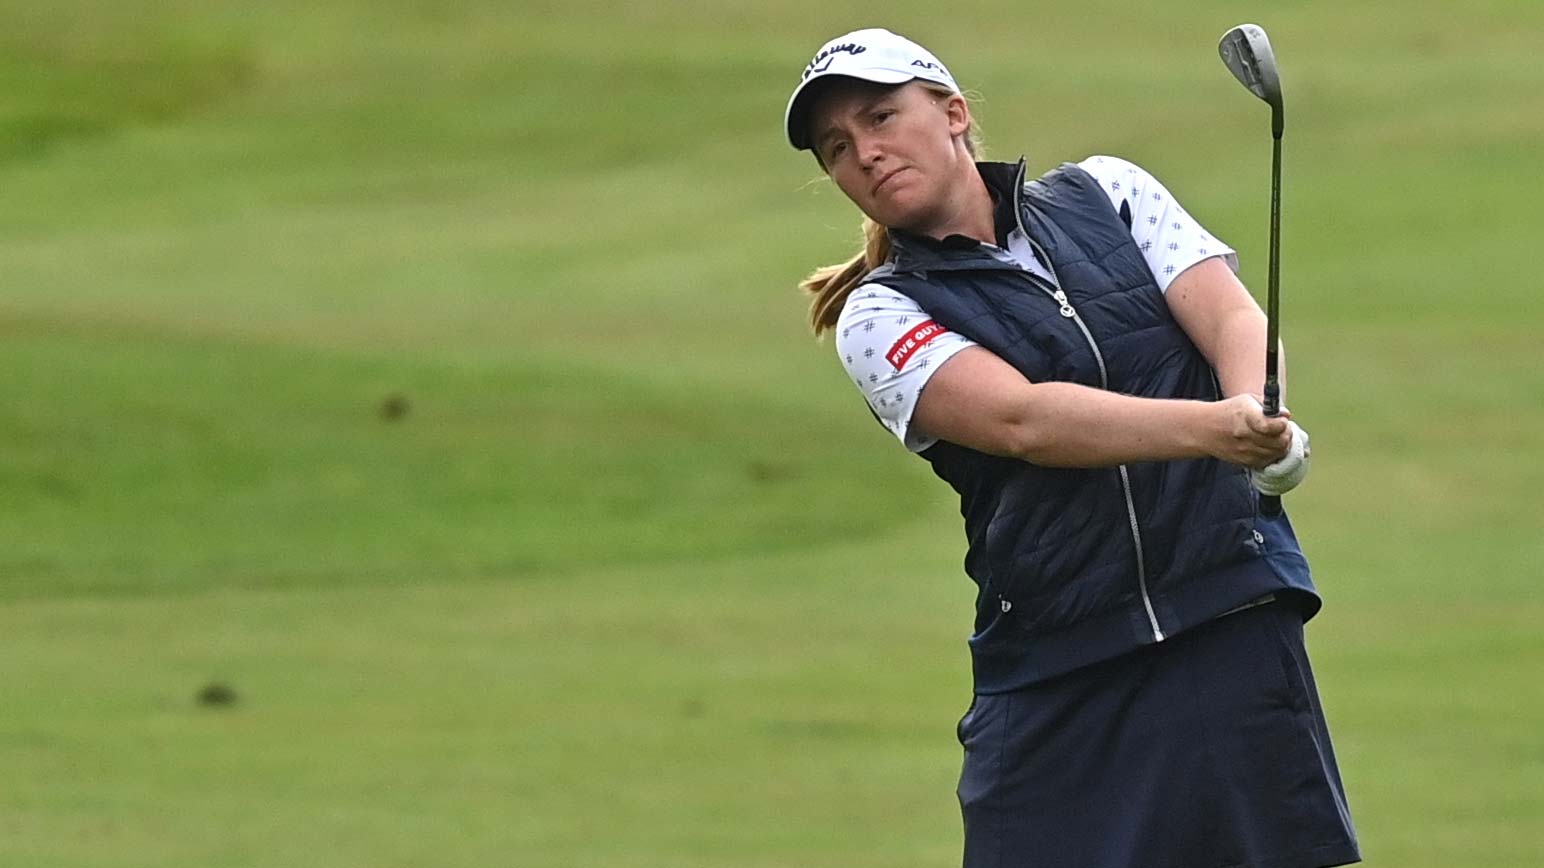 Gemma Dryburgh of Scotland chips during the first round of The ISPS HANDA World Invitationa